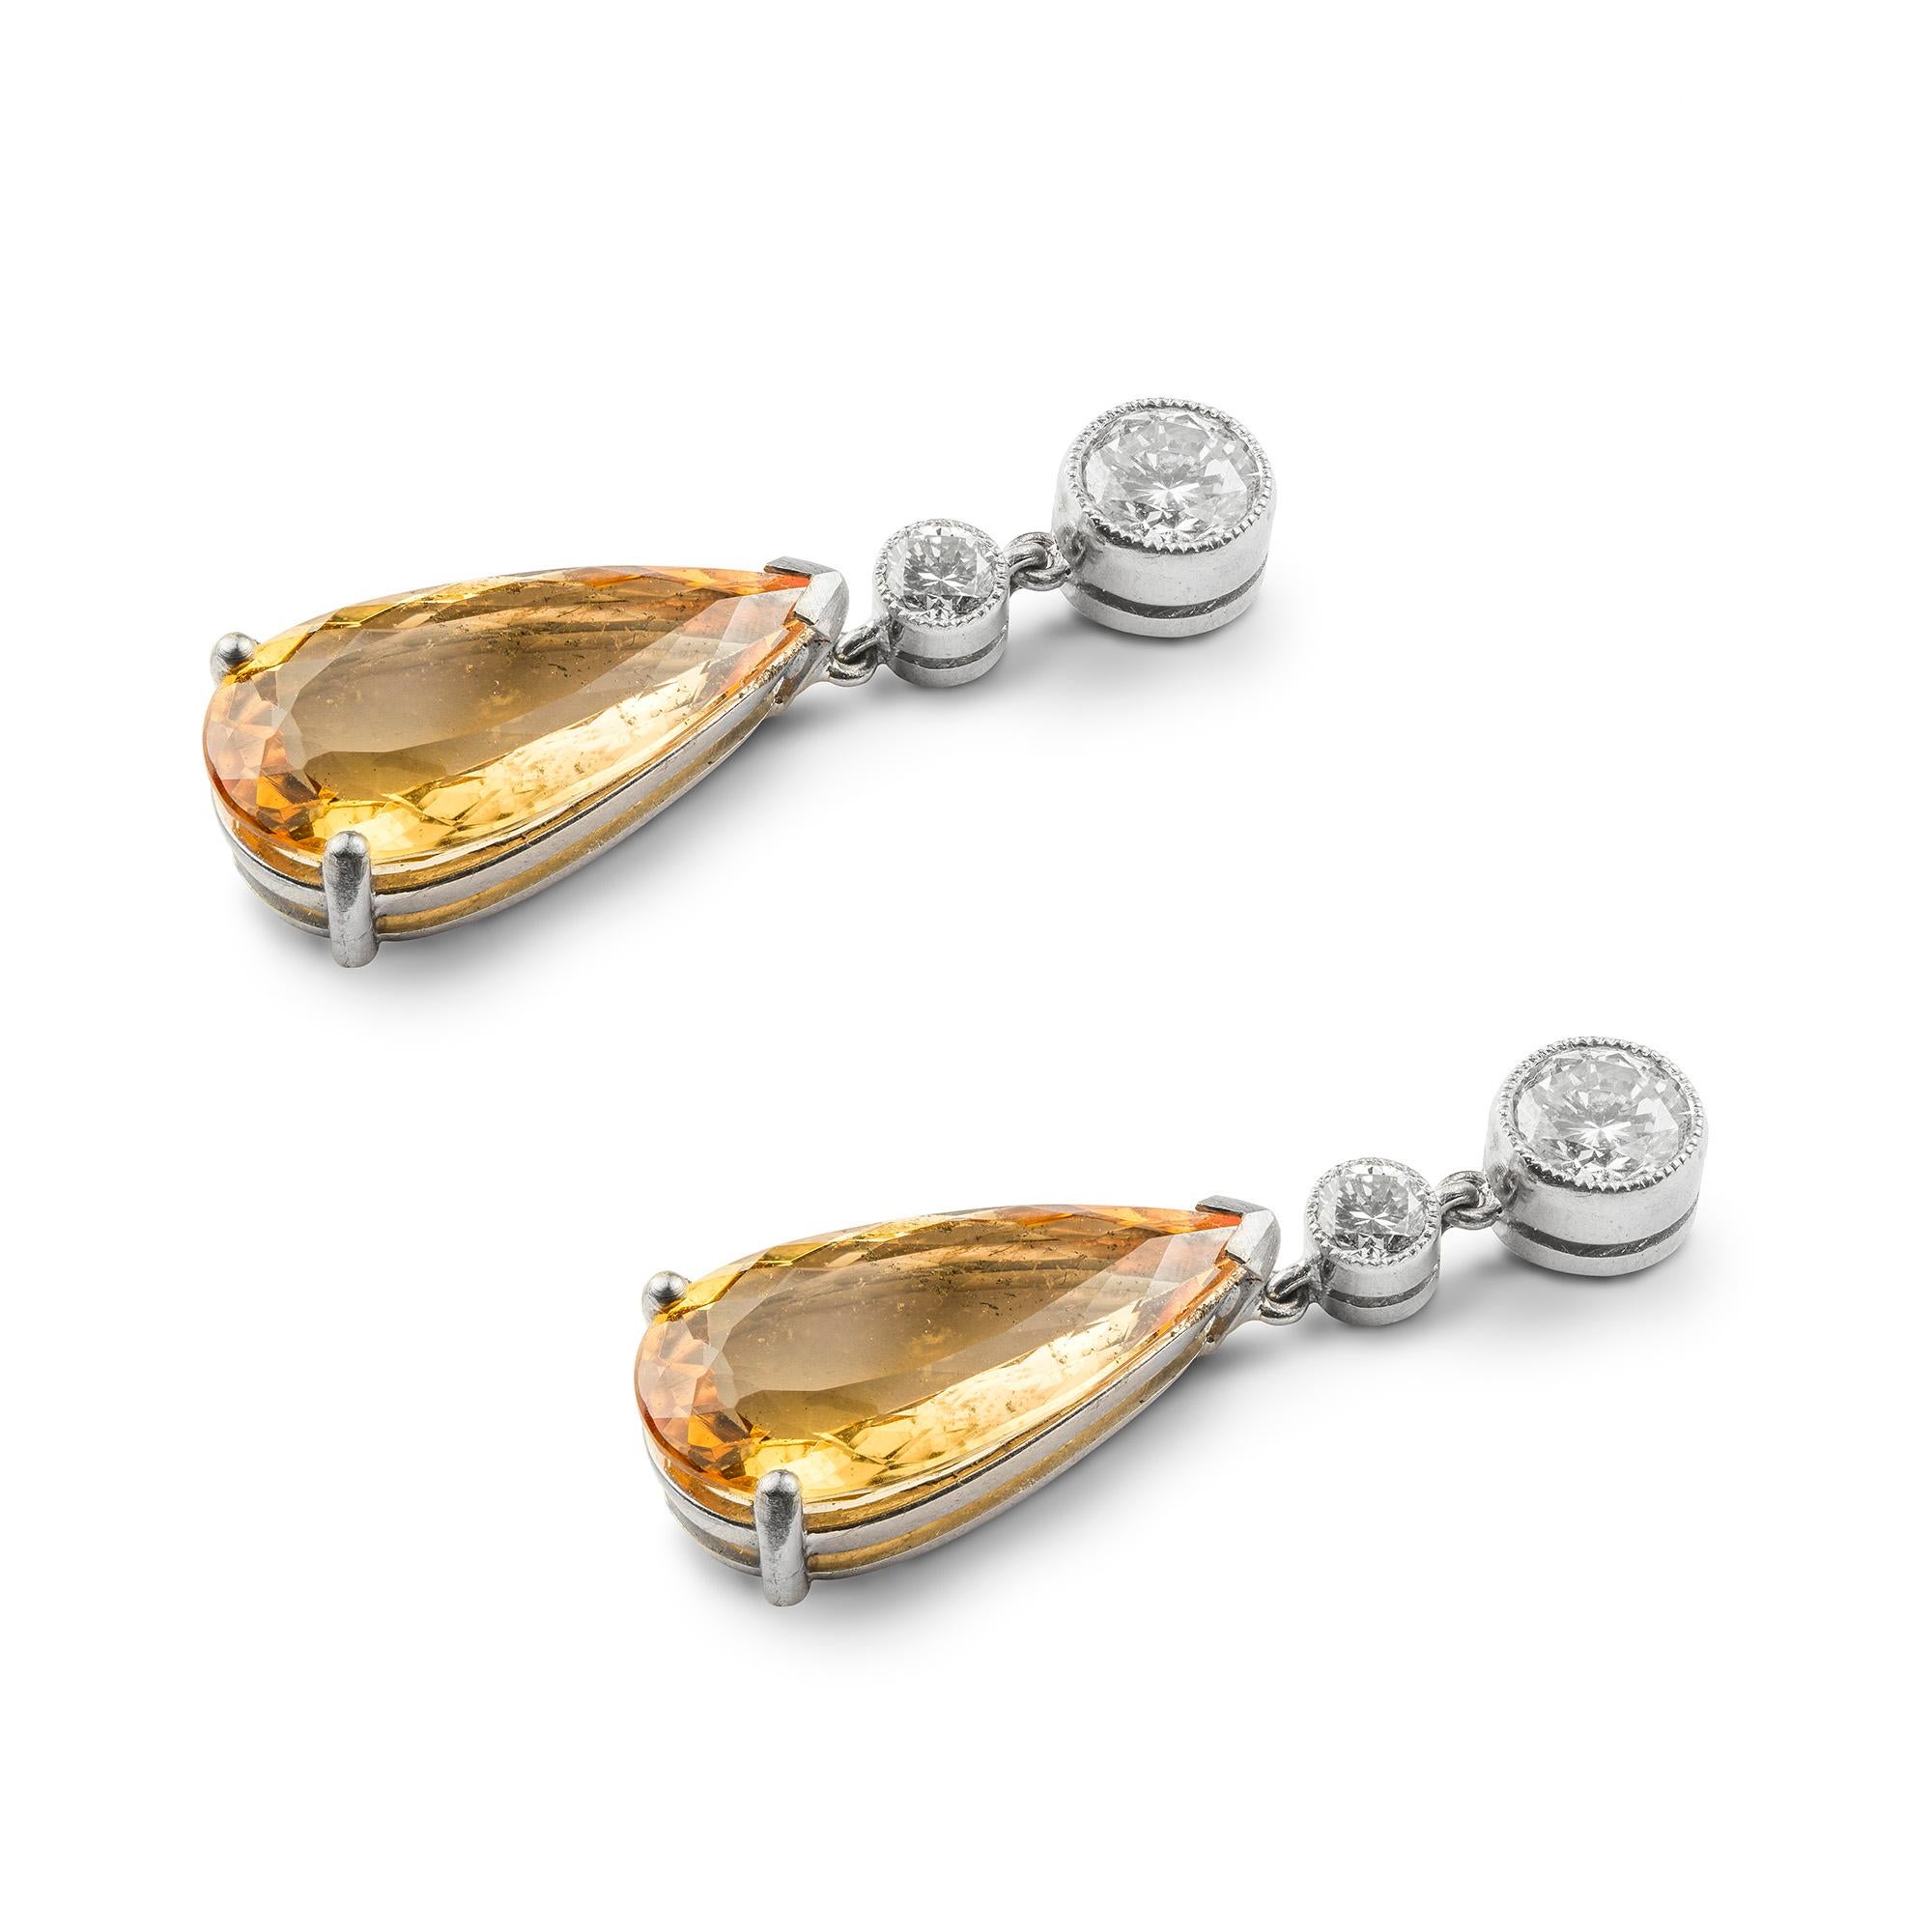 A pair of topaz and diamond drop earrings, the earrings consisting of two pear-shape topazes with total weight 9.40 carats, each suspended from two graduated round brilliant-cut diamonds with total weight of approximately one carat, millegrain-set